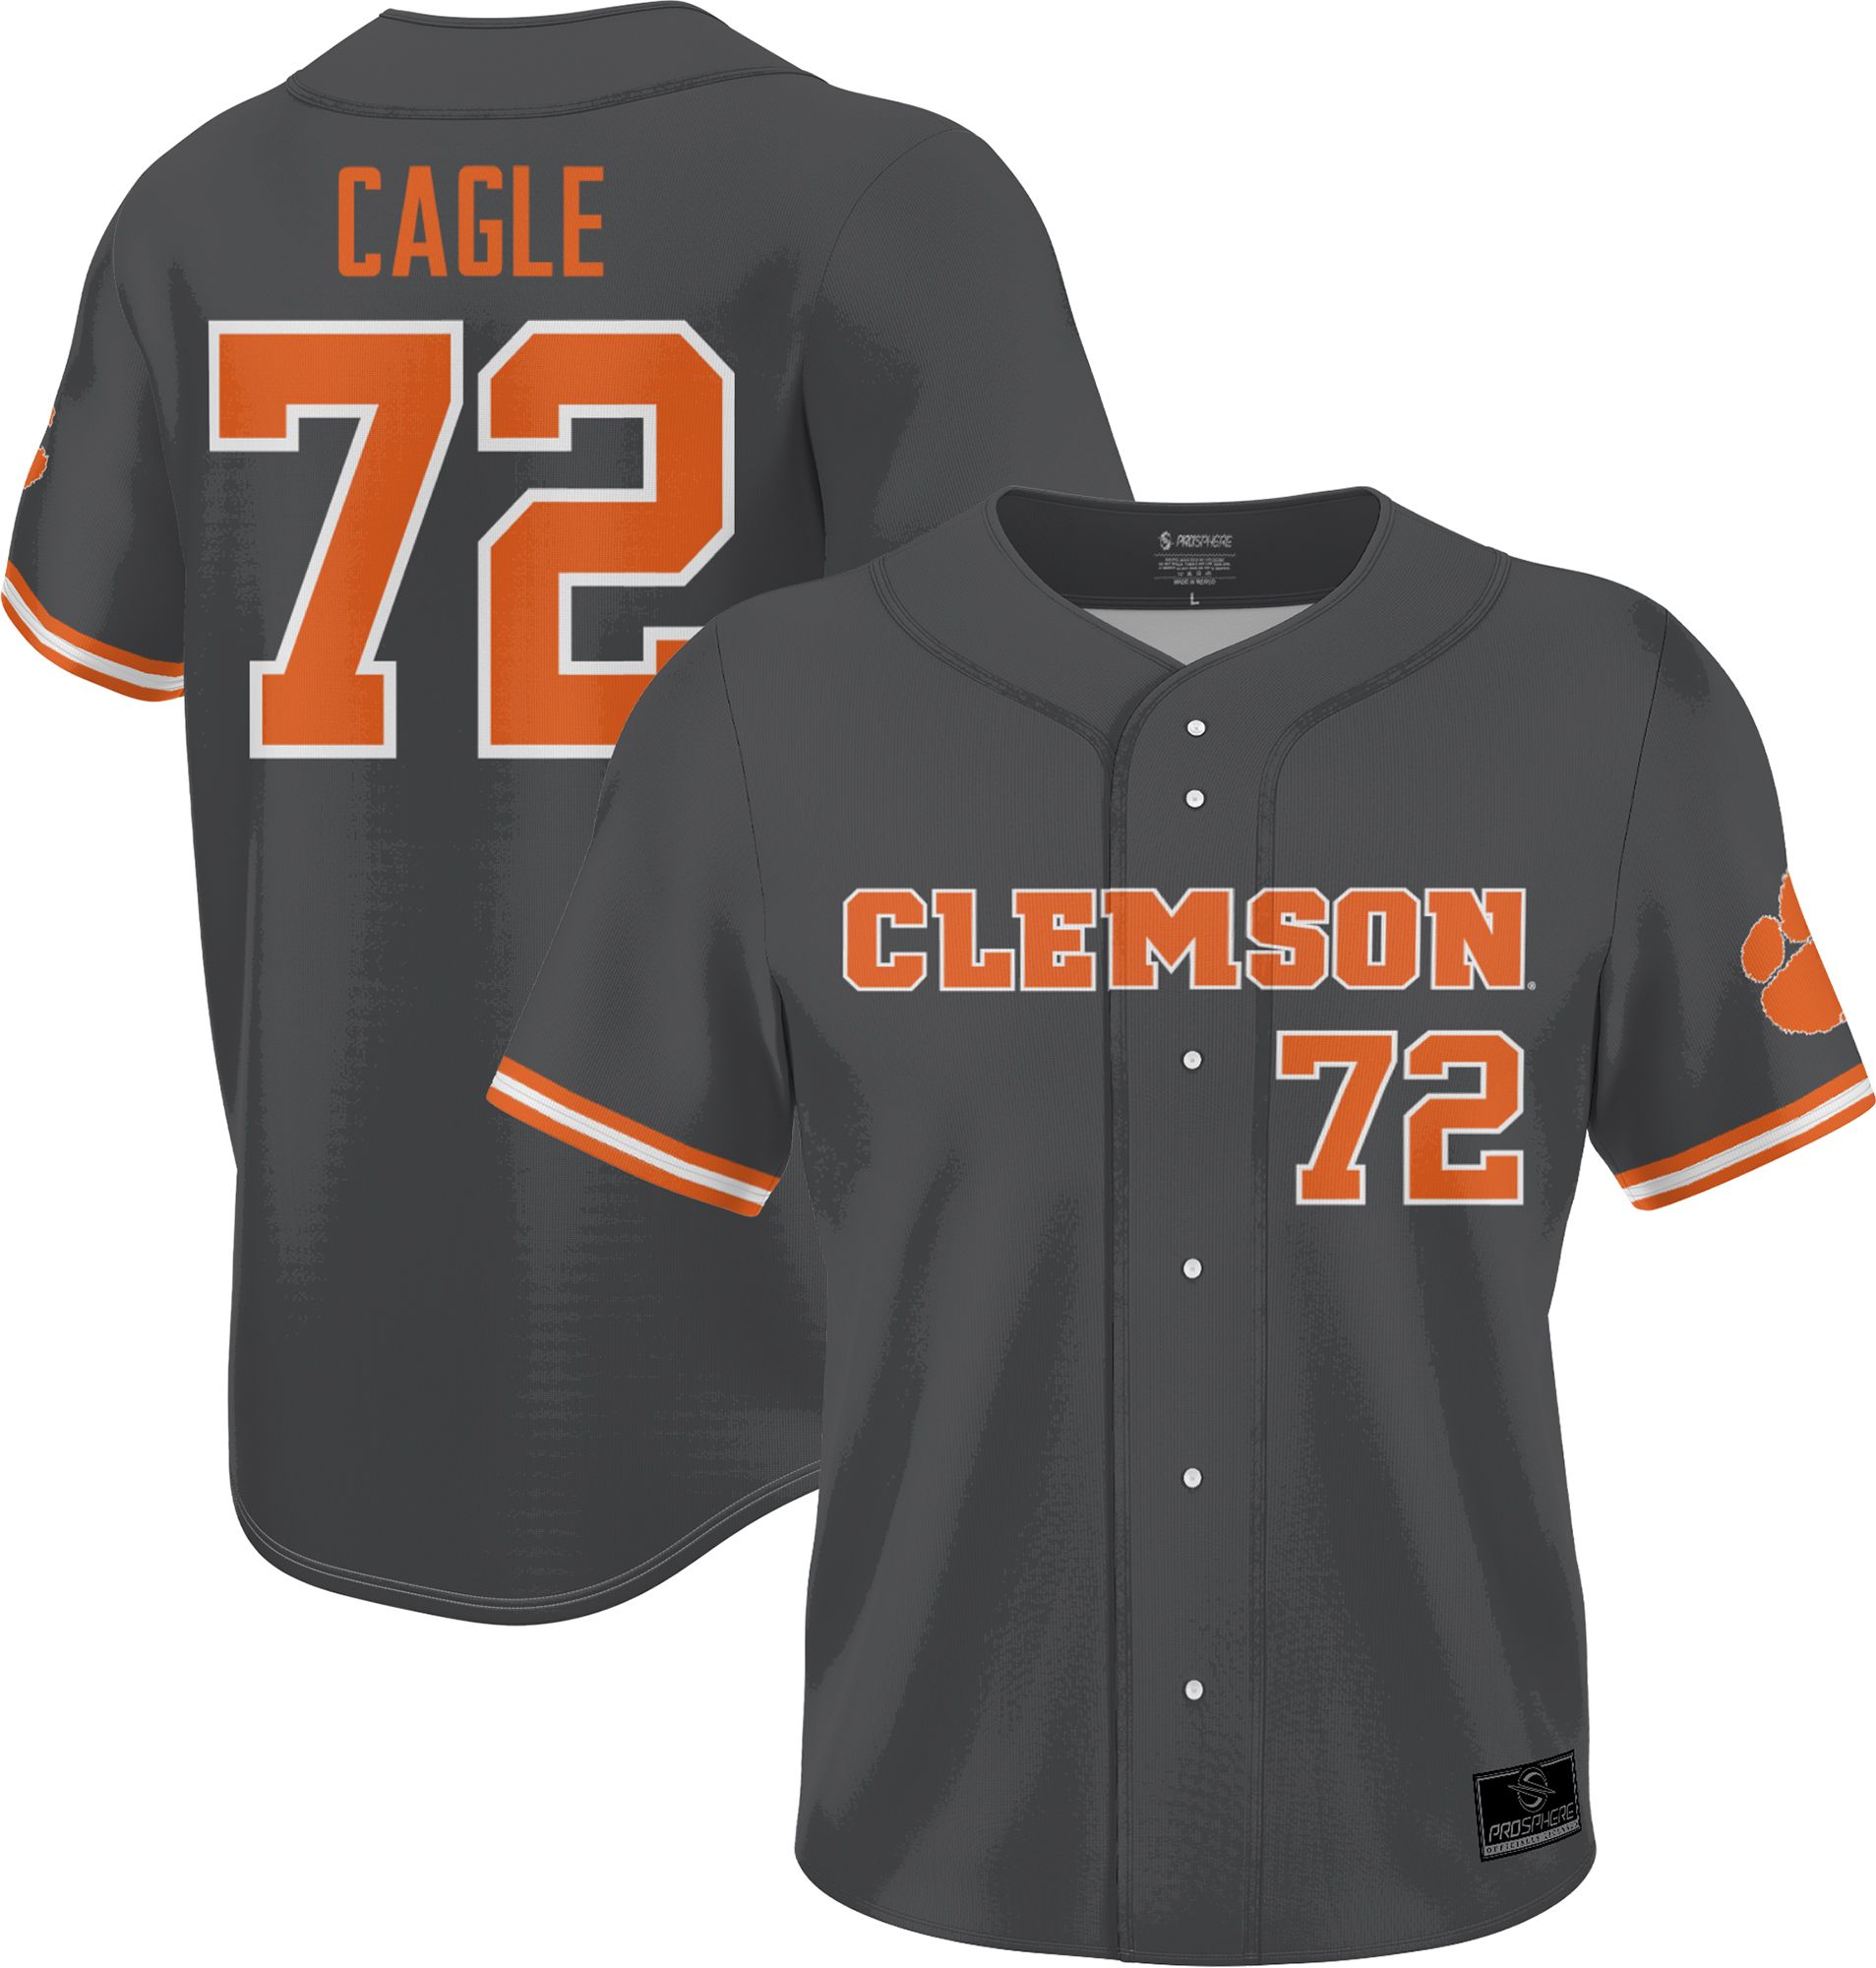 Prosphere Men's Clemson Tigers #72 Grey Valerie Cagle Full Sublimated Softball Jersey